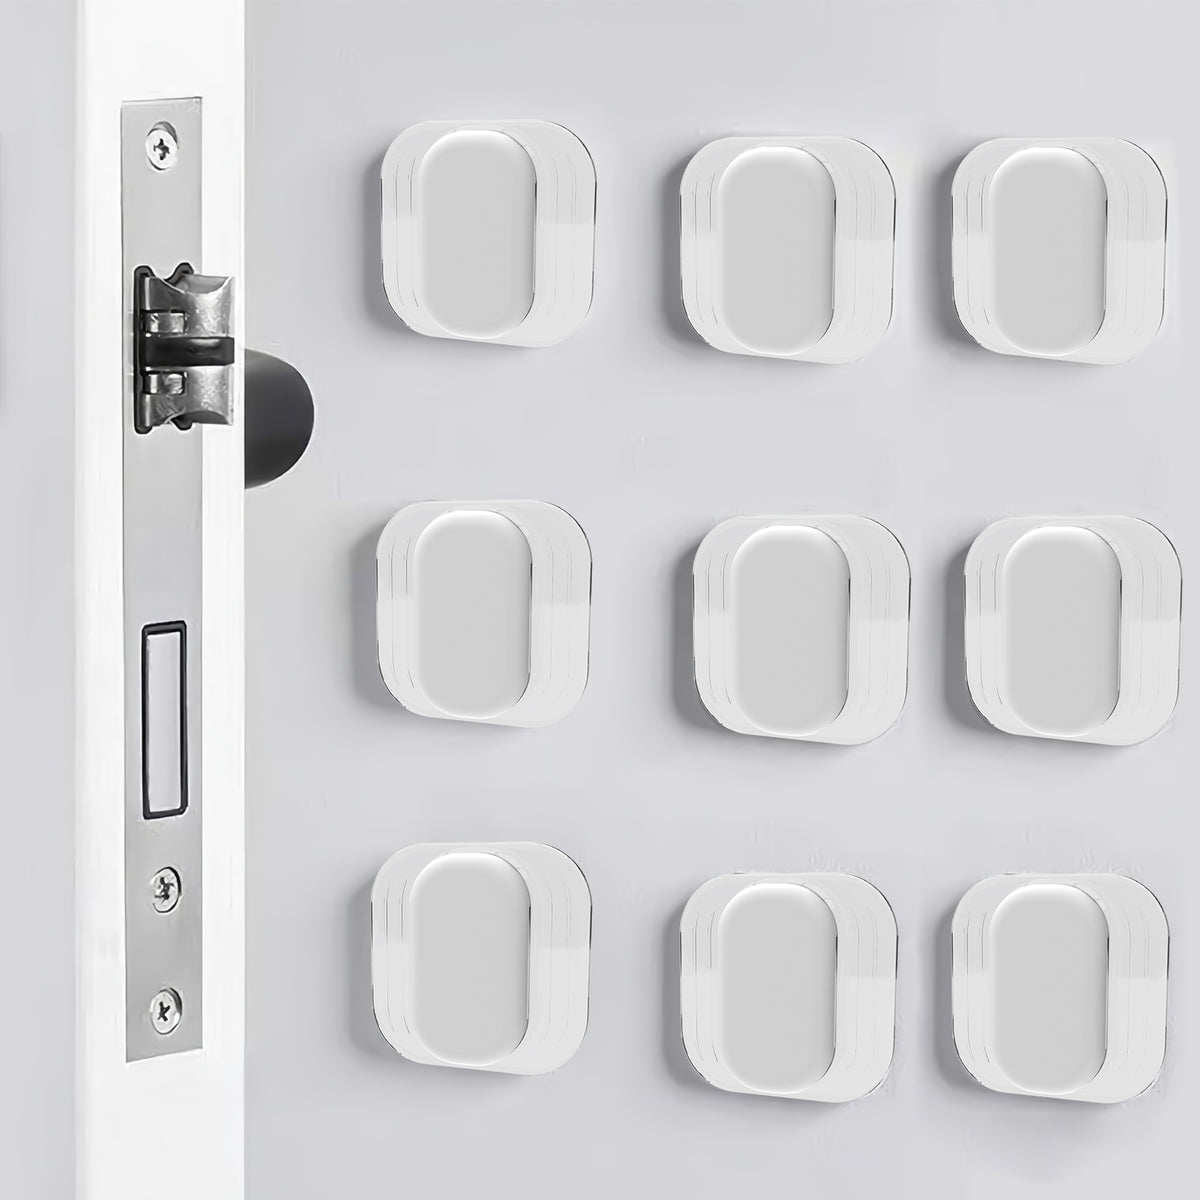 Adorila 9 Pack Door Stoppers Wall Protector, Self Adhesive Silicone Door Knobs Wall Protectors, Door Handle Bumper for Home Office (White)